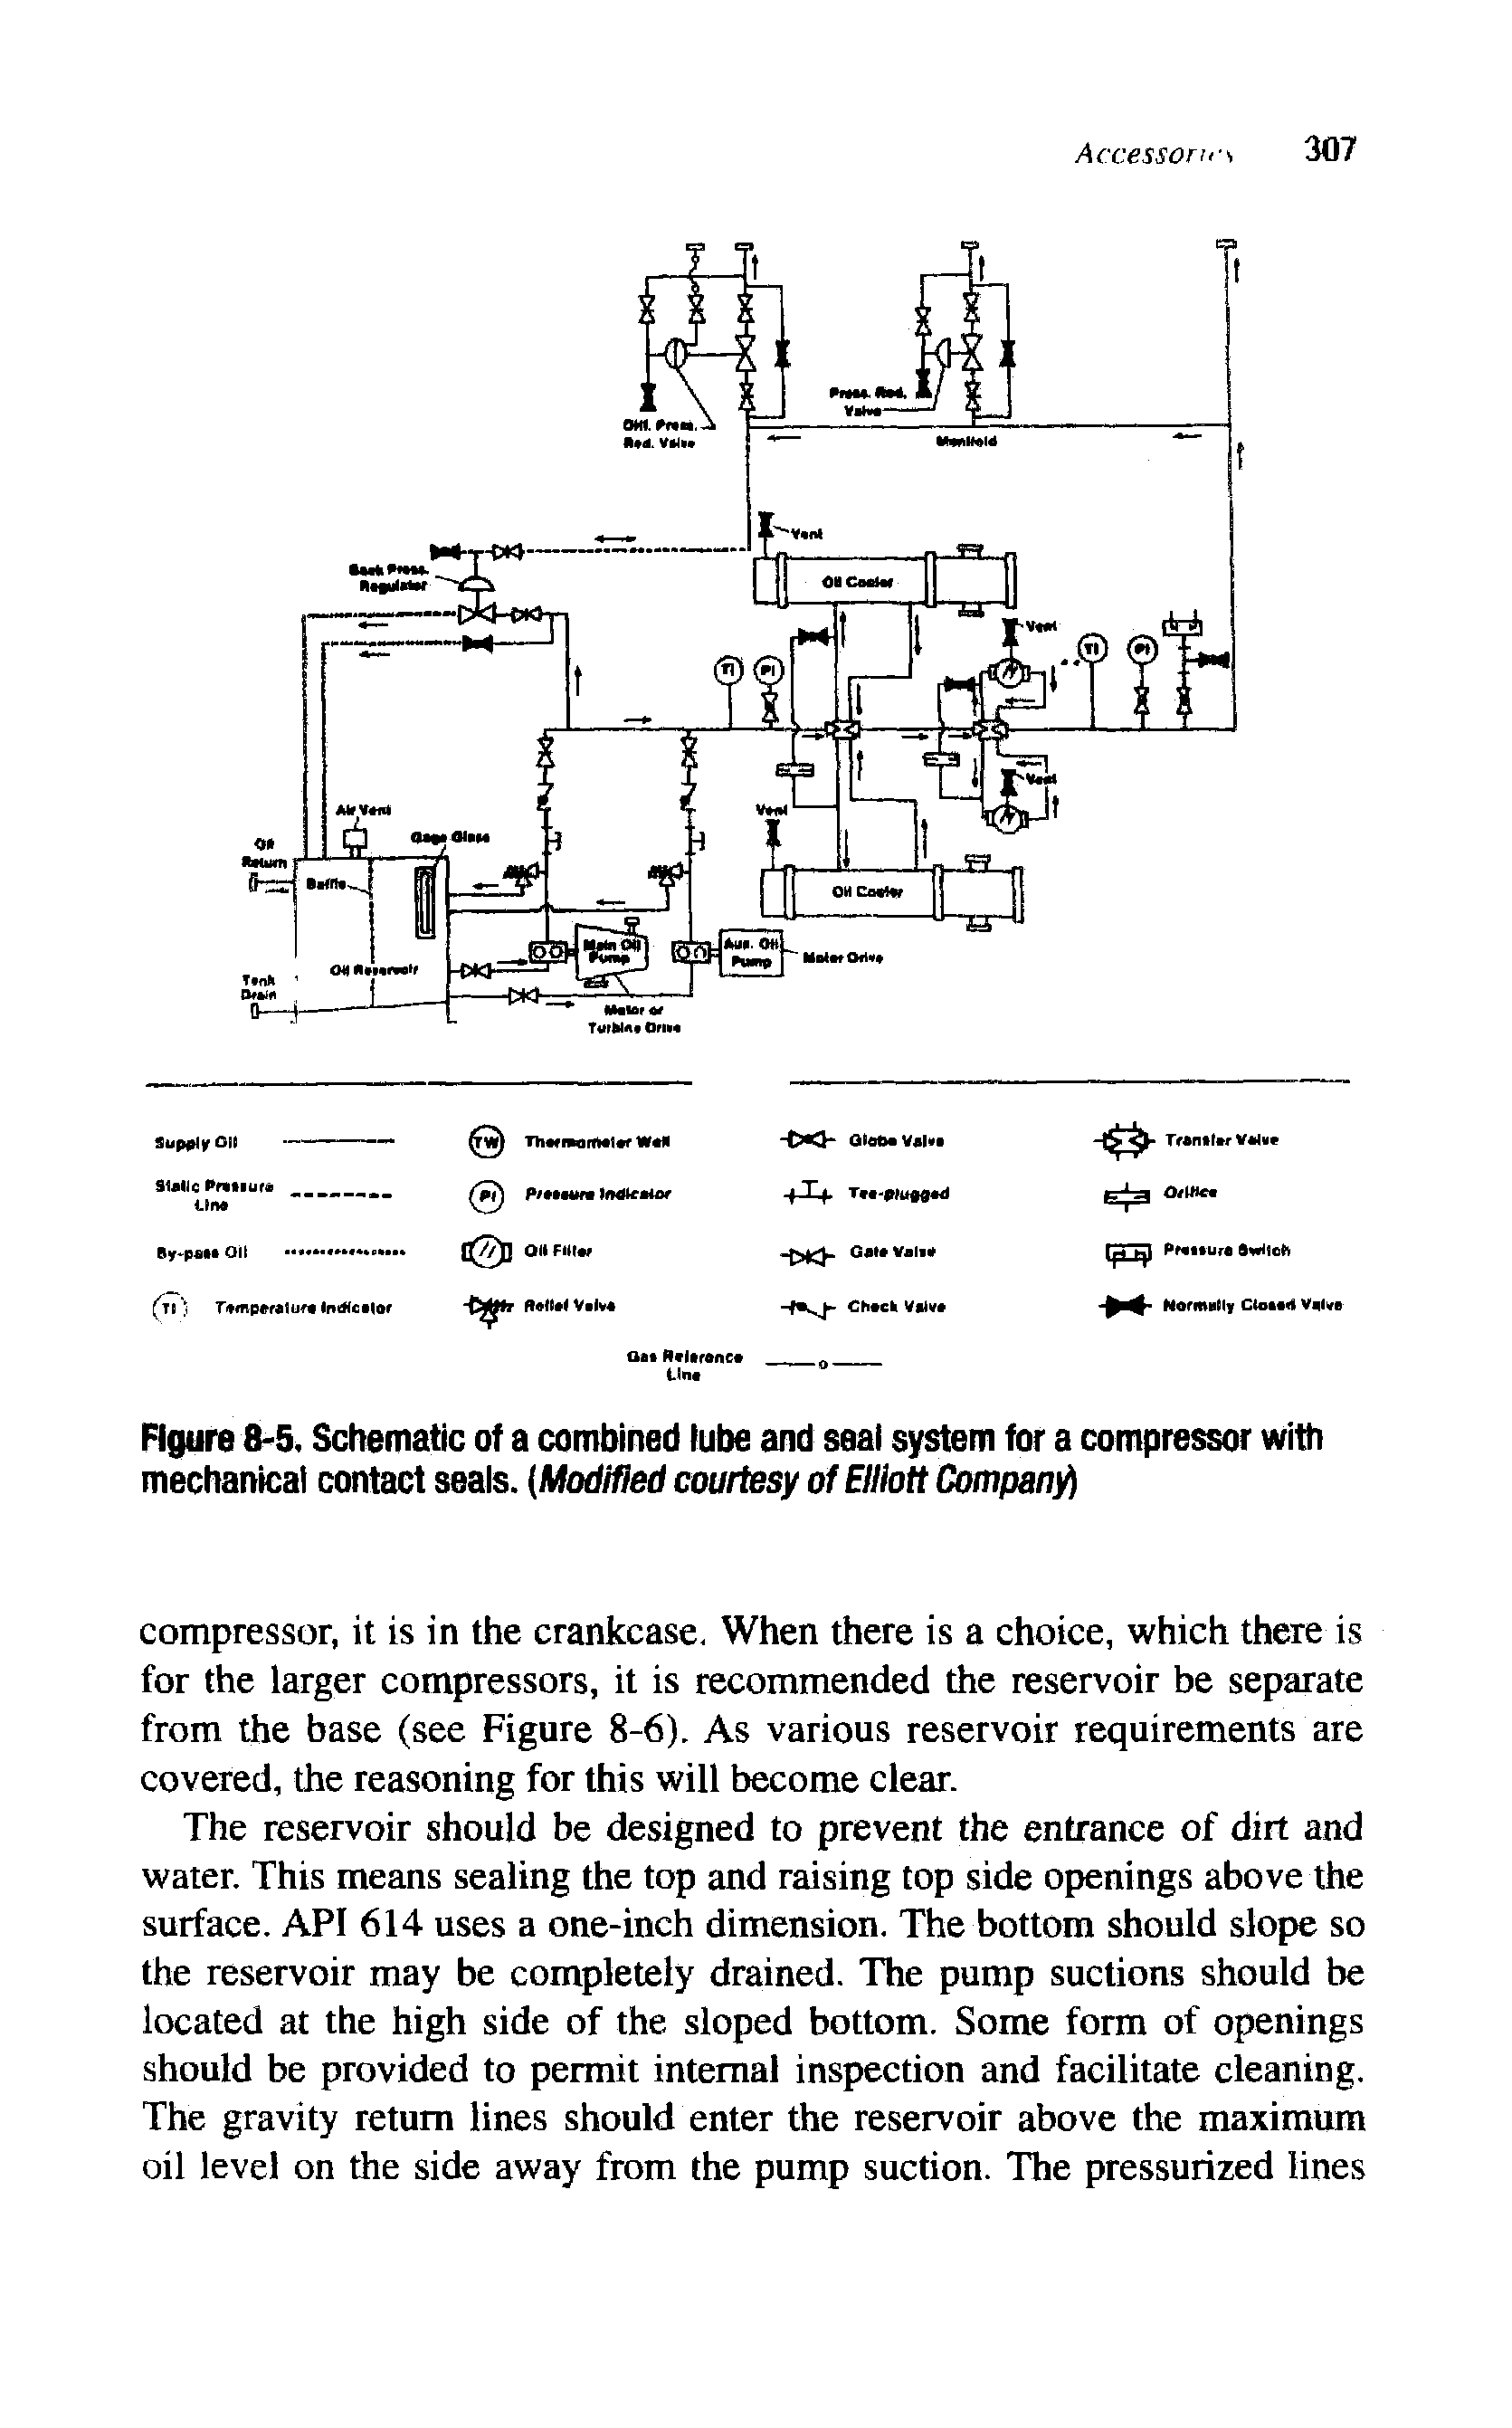 Figure S-S, Schematic of a combined lube and seai system for a compressor with mechanical contact seals. (Modified courtesy of Elliott Compand...